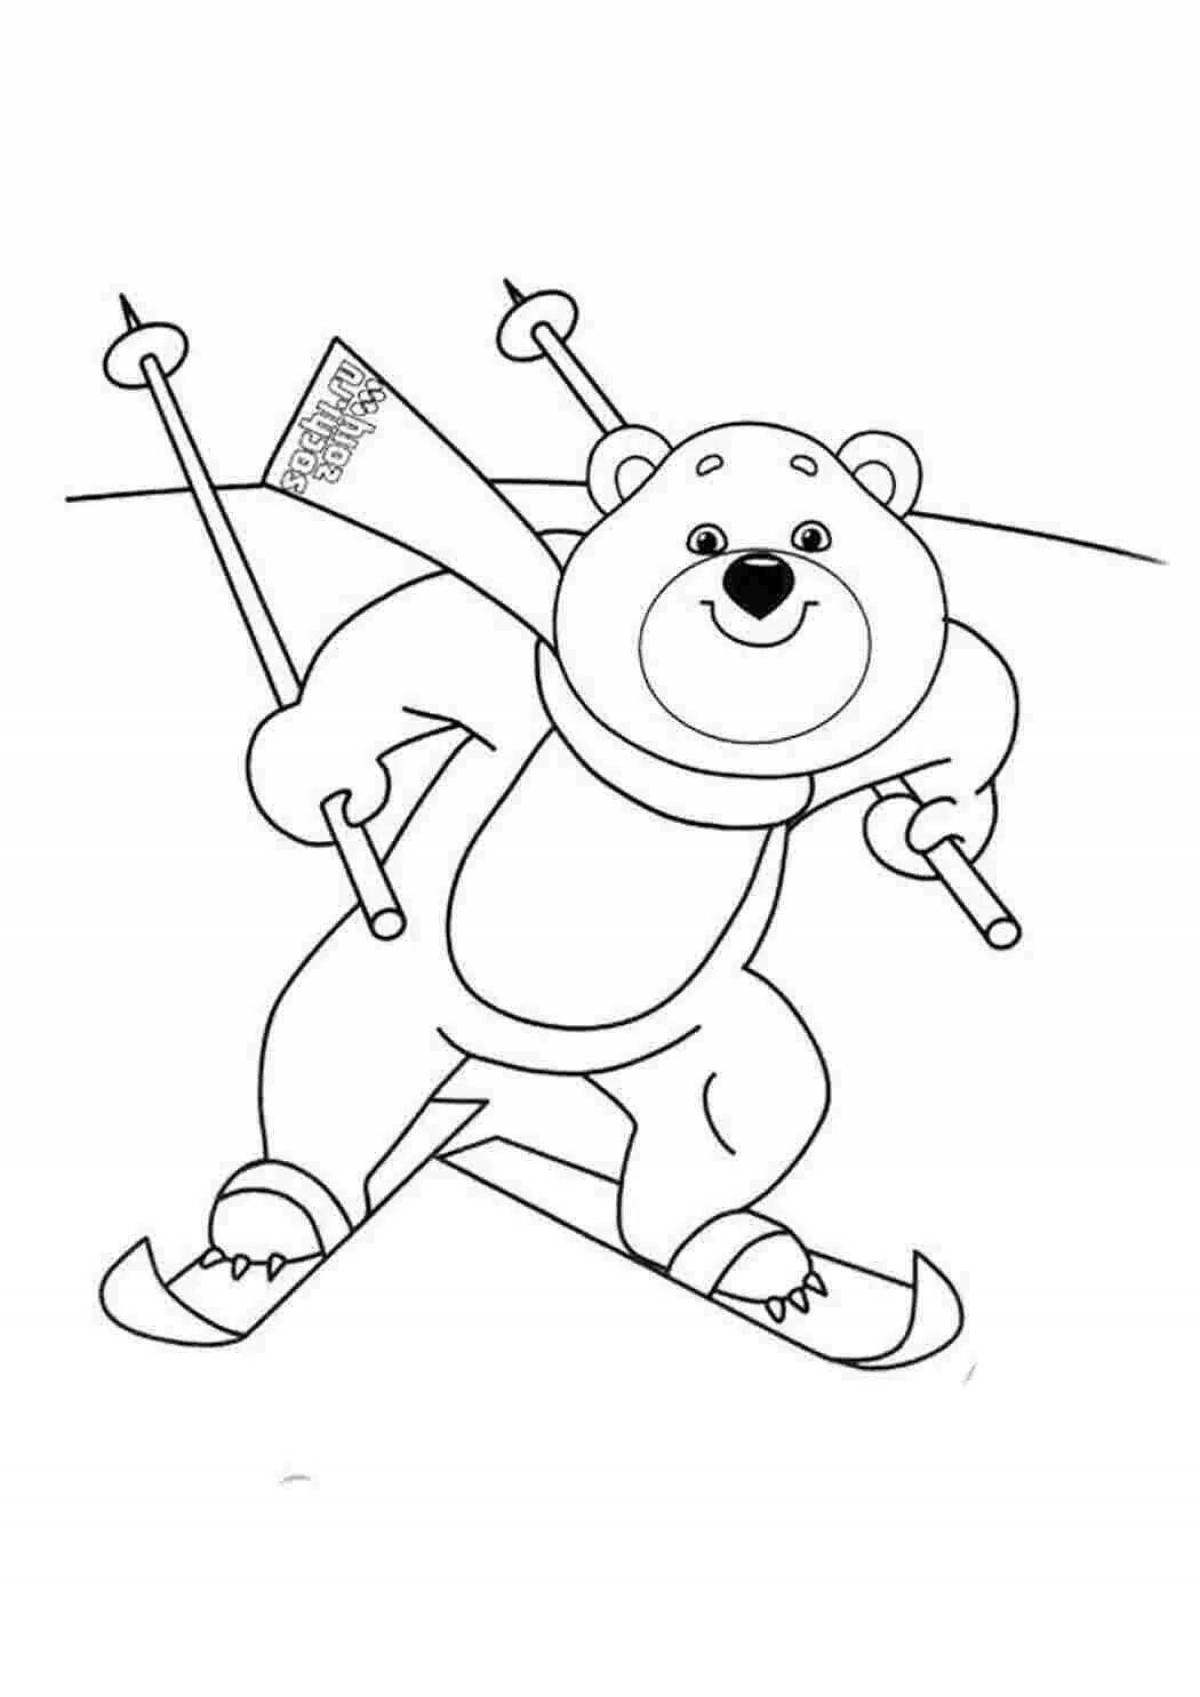 Incredible olympic coloring book for kids